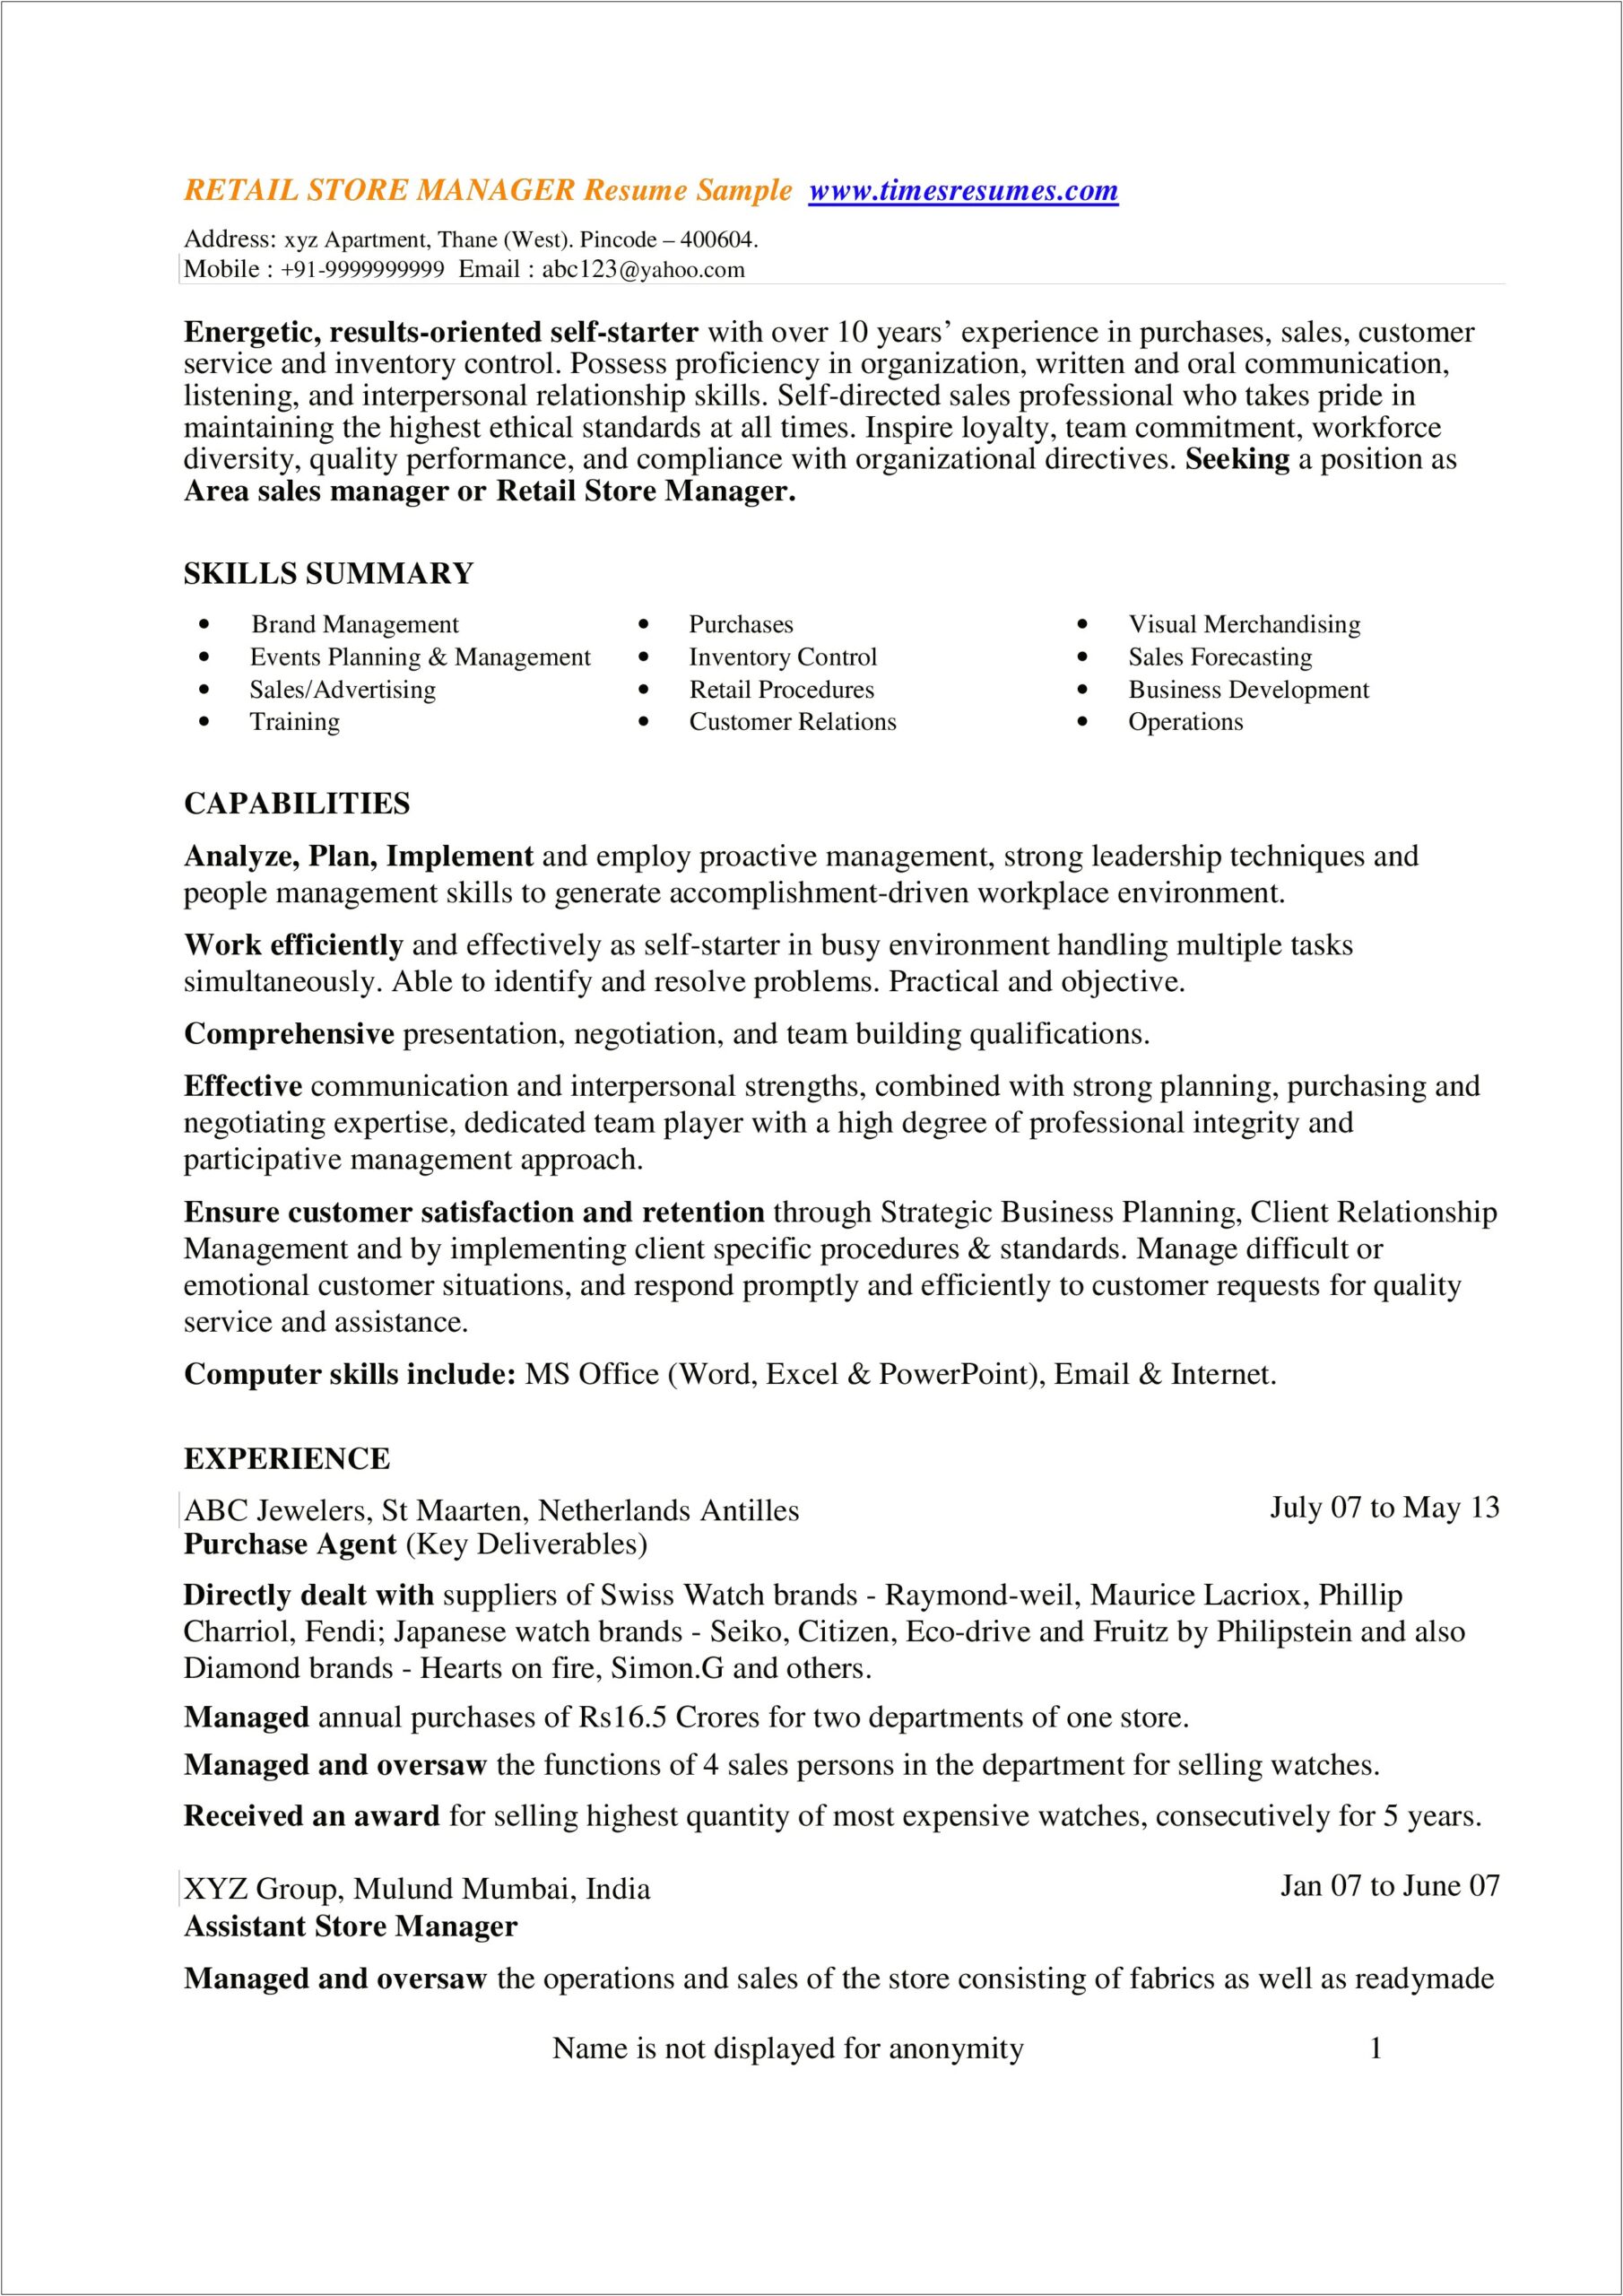 Resume Summary For Area Sales Manager